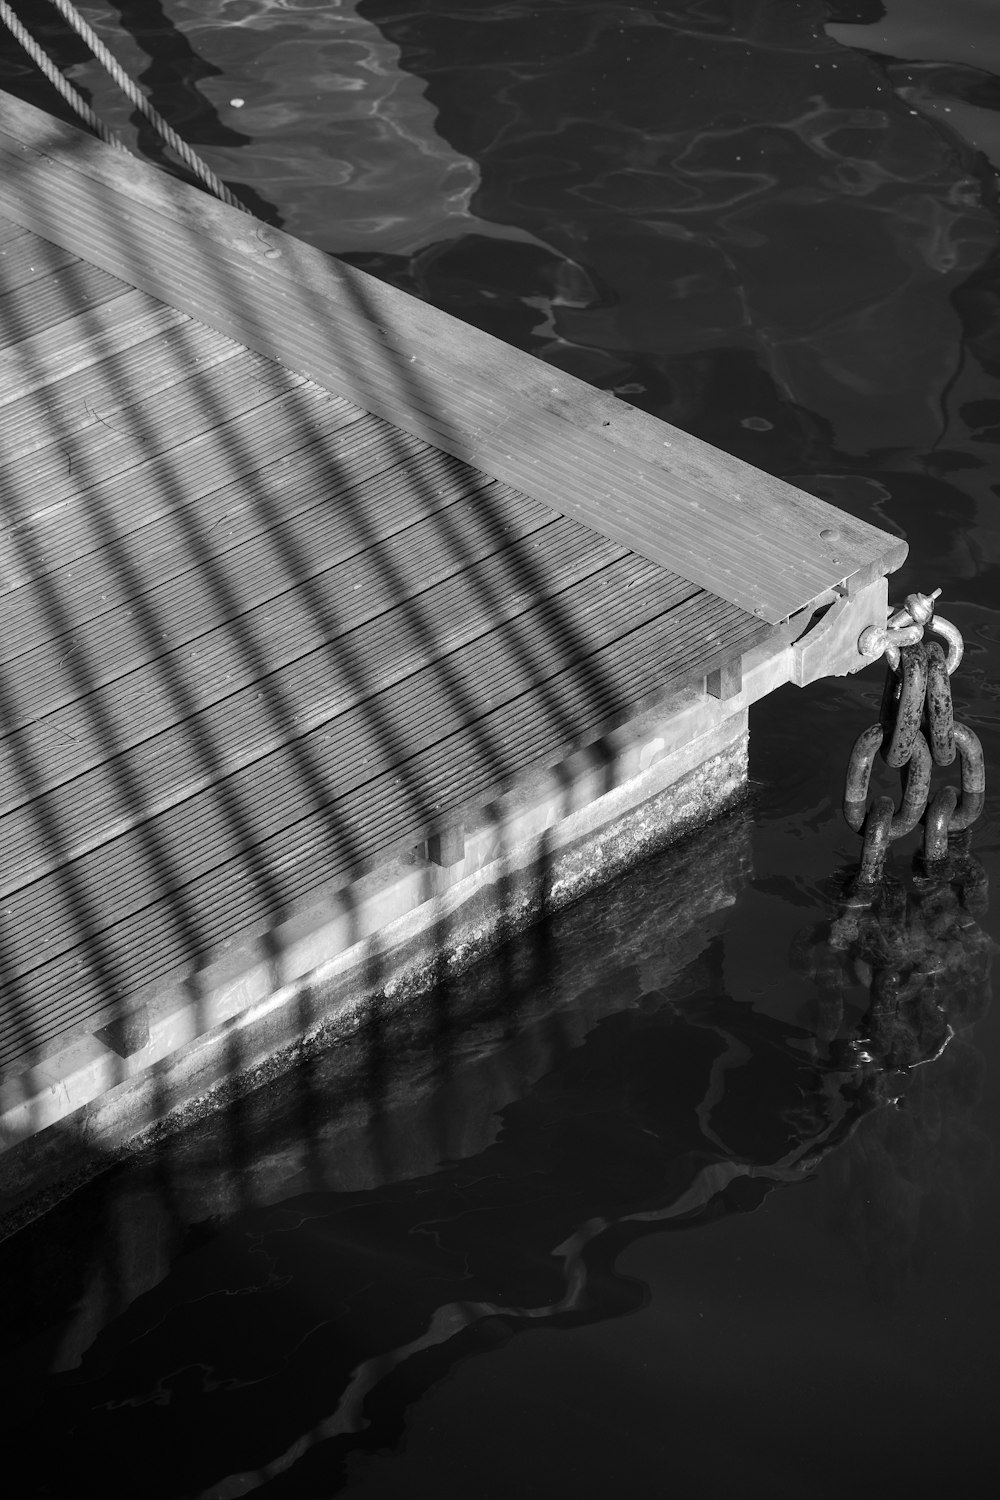 a chain is attached to a dock in the water